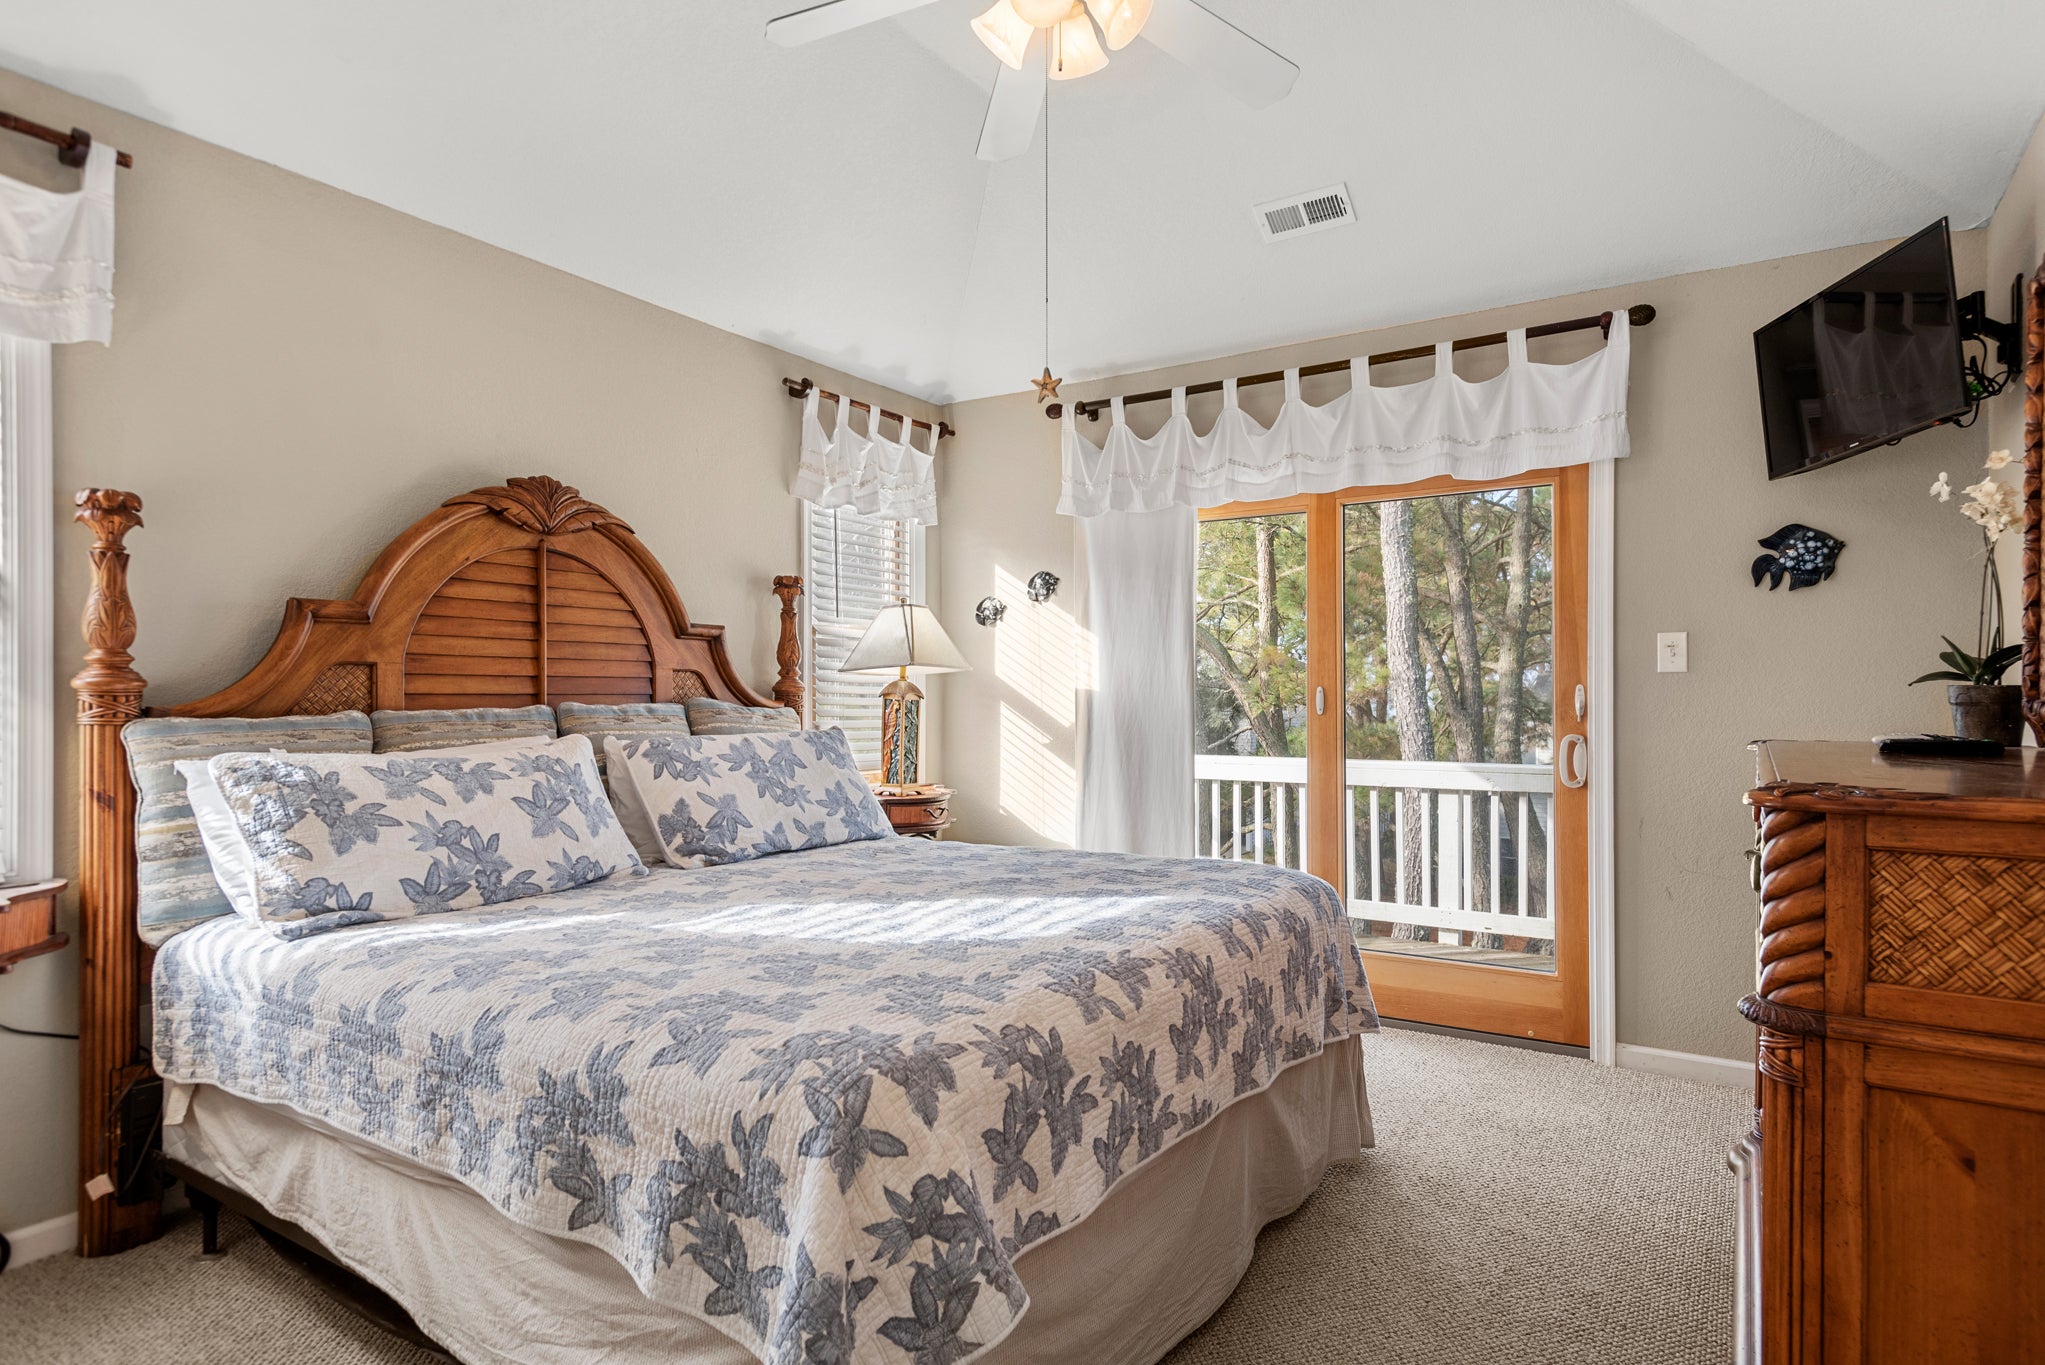 CL572: Endless Sunsets in Corolla Light l Top Level Bedroom 5